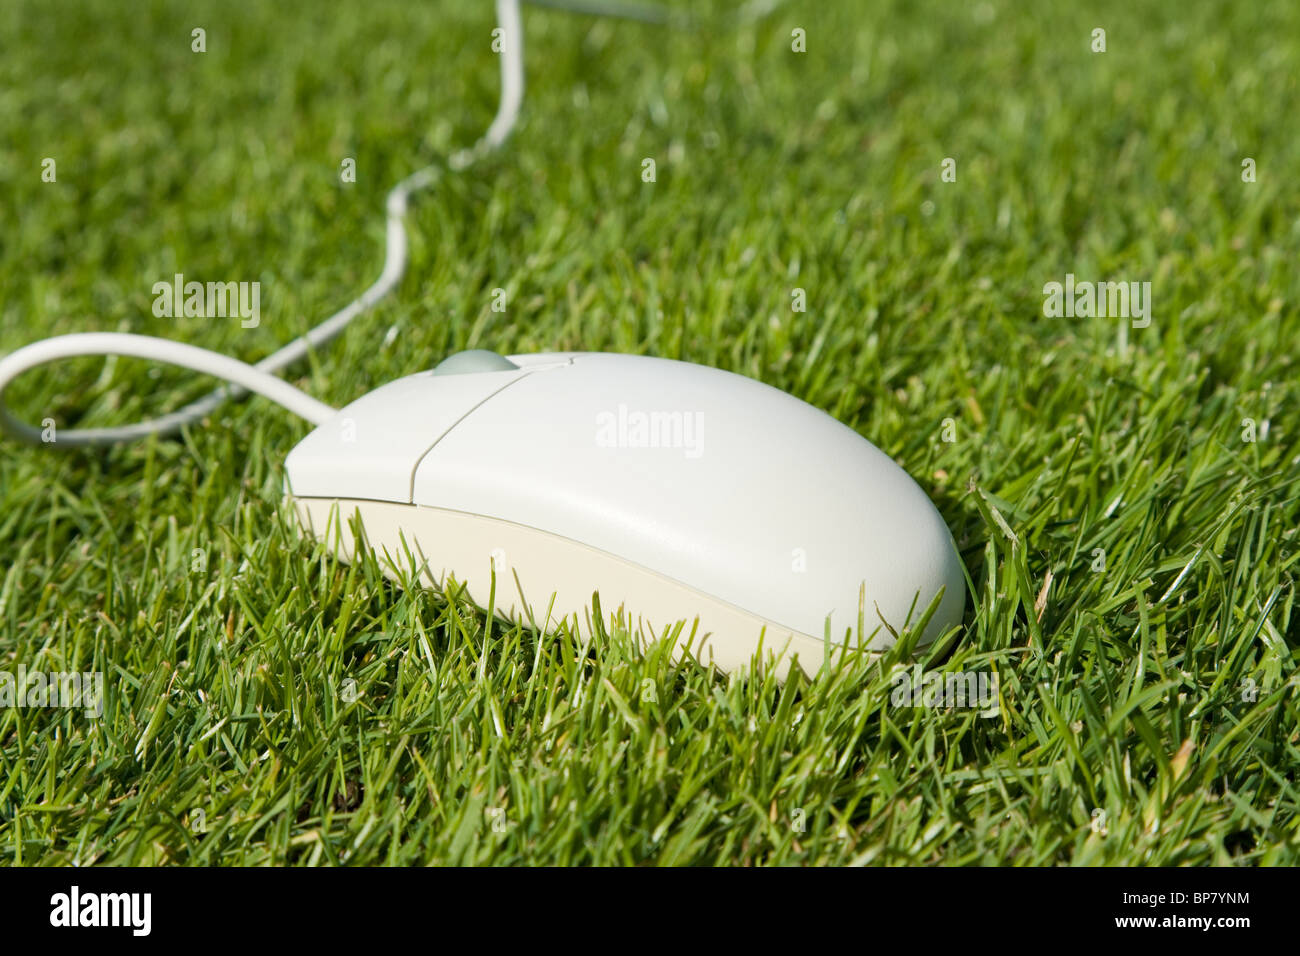 Computer Mouse and lawn, concept of Freedom, Environment Protection Stock Photo